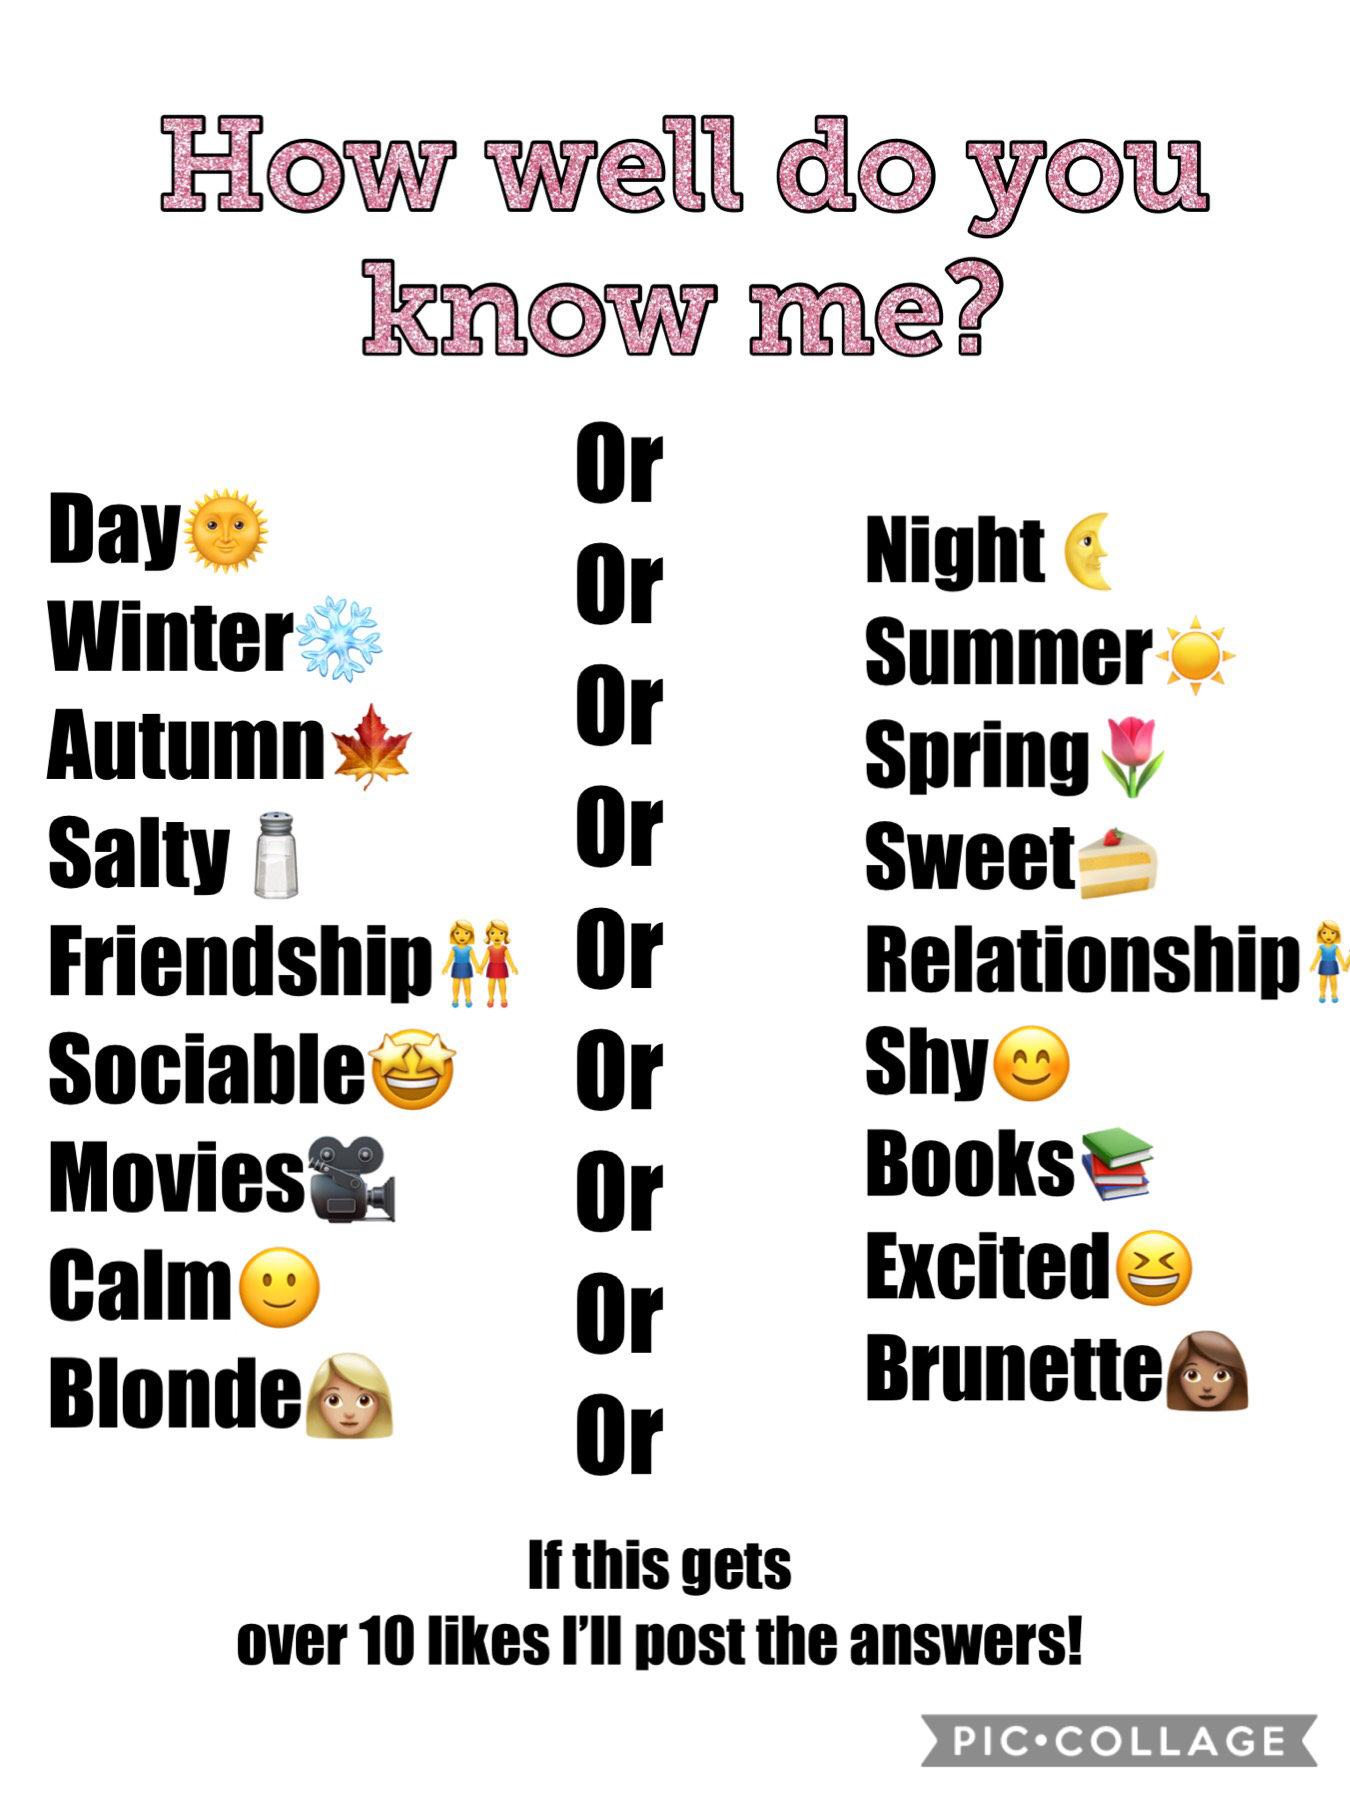 Let’s see how we’ll do you know me? I admit the last one was difficult so I’m gonna tell you, I’m brunette!😋